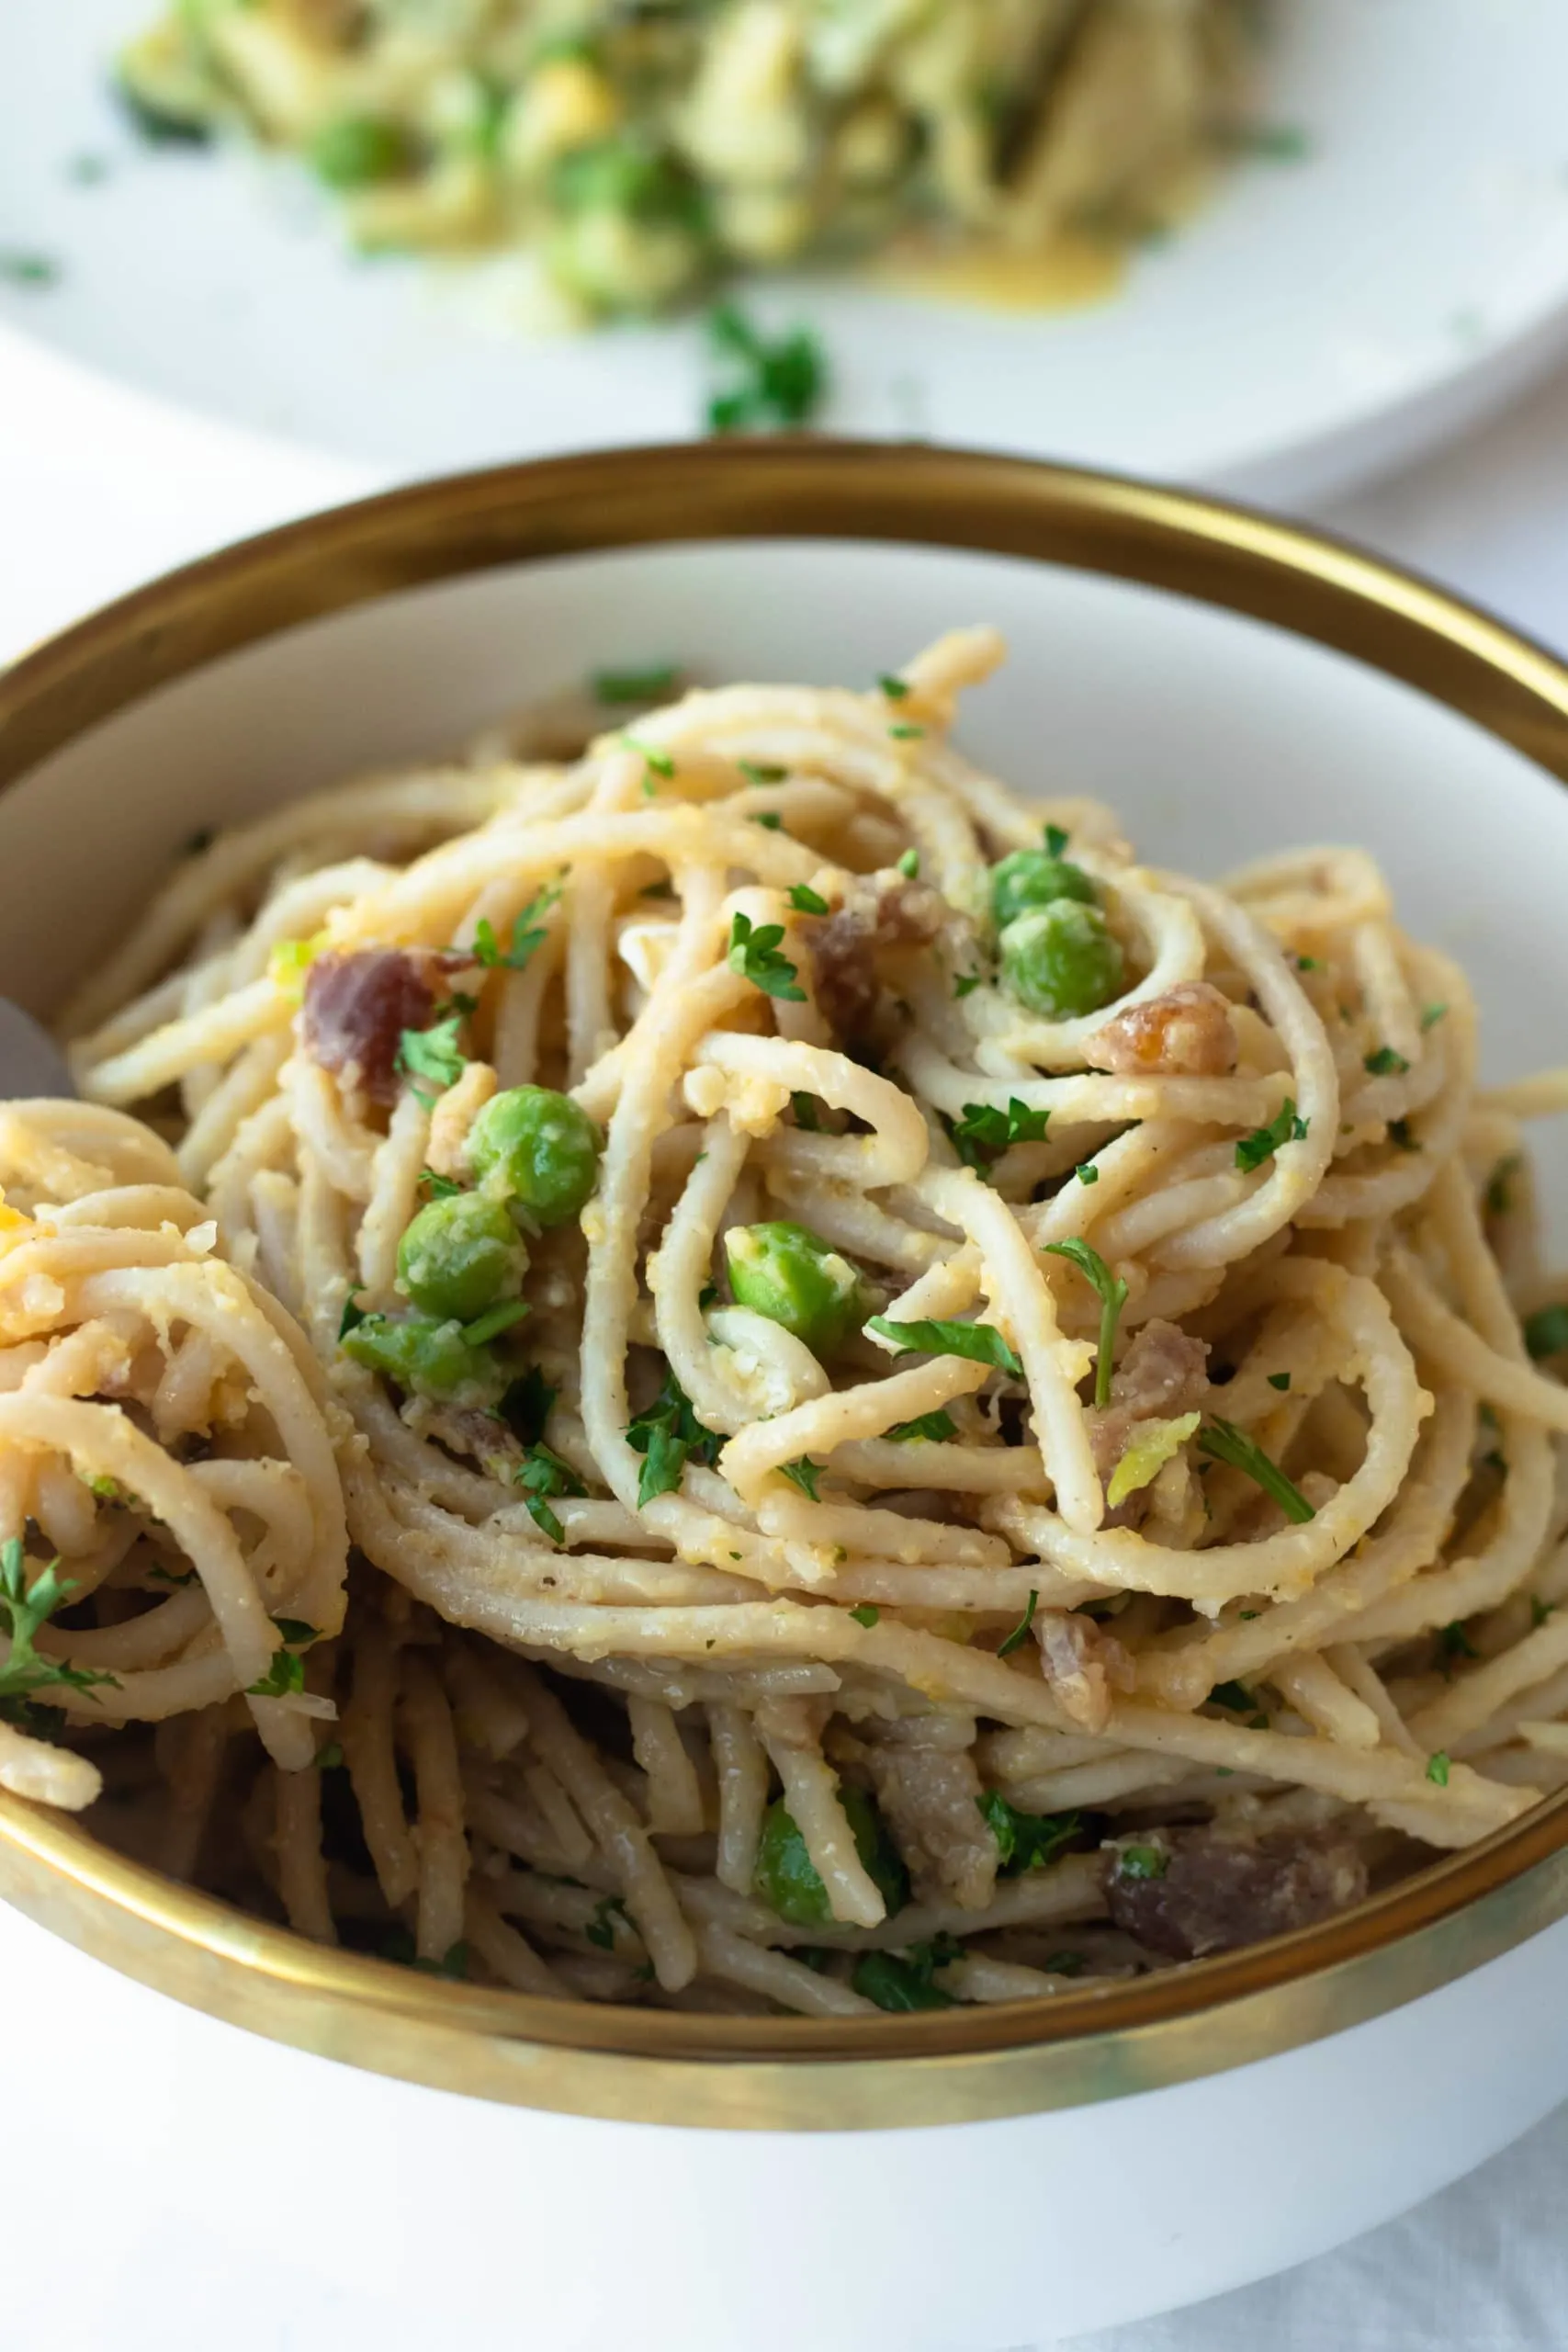 Classic carbonara pasta is transformed into a healthy, gluten free, and low carb pasta recipe. Parmesan cheese, peas, bacon, and browned butter adorn your choice of low carb noodles or zucchini noodles. This decadent keto carbonara will make you forget you're eating healthy!